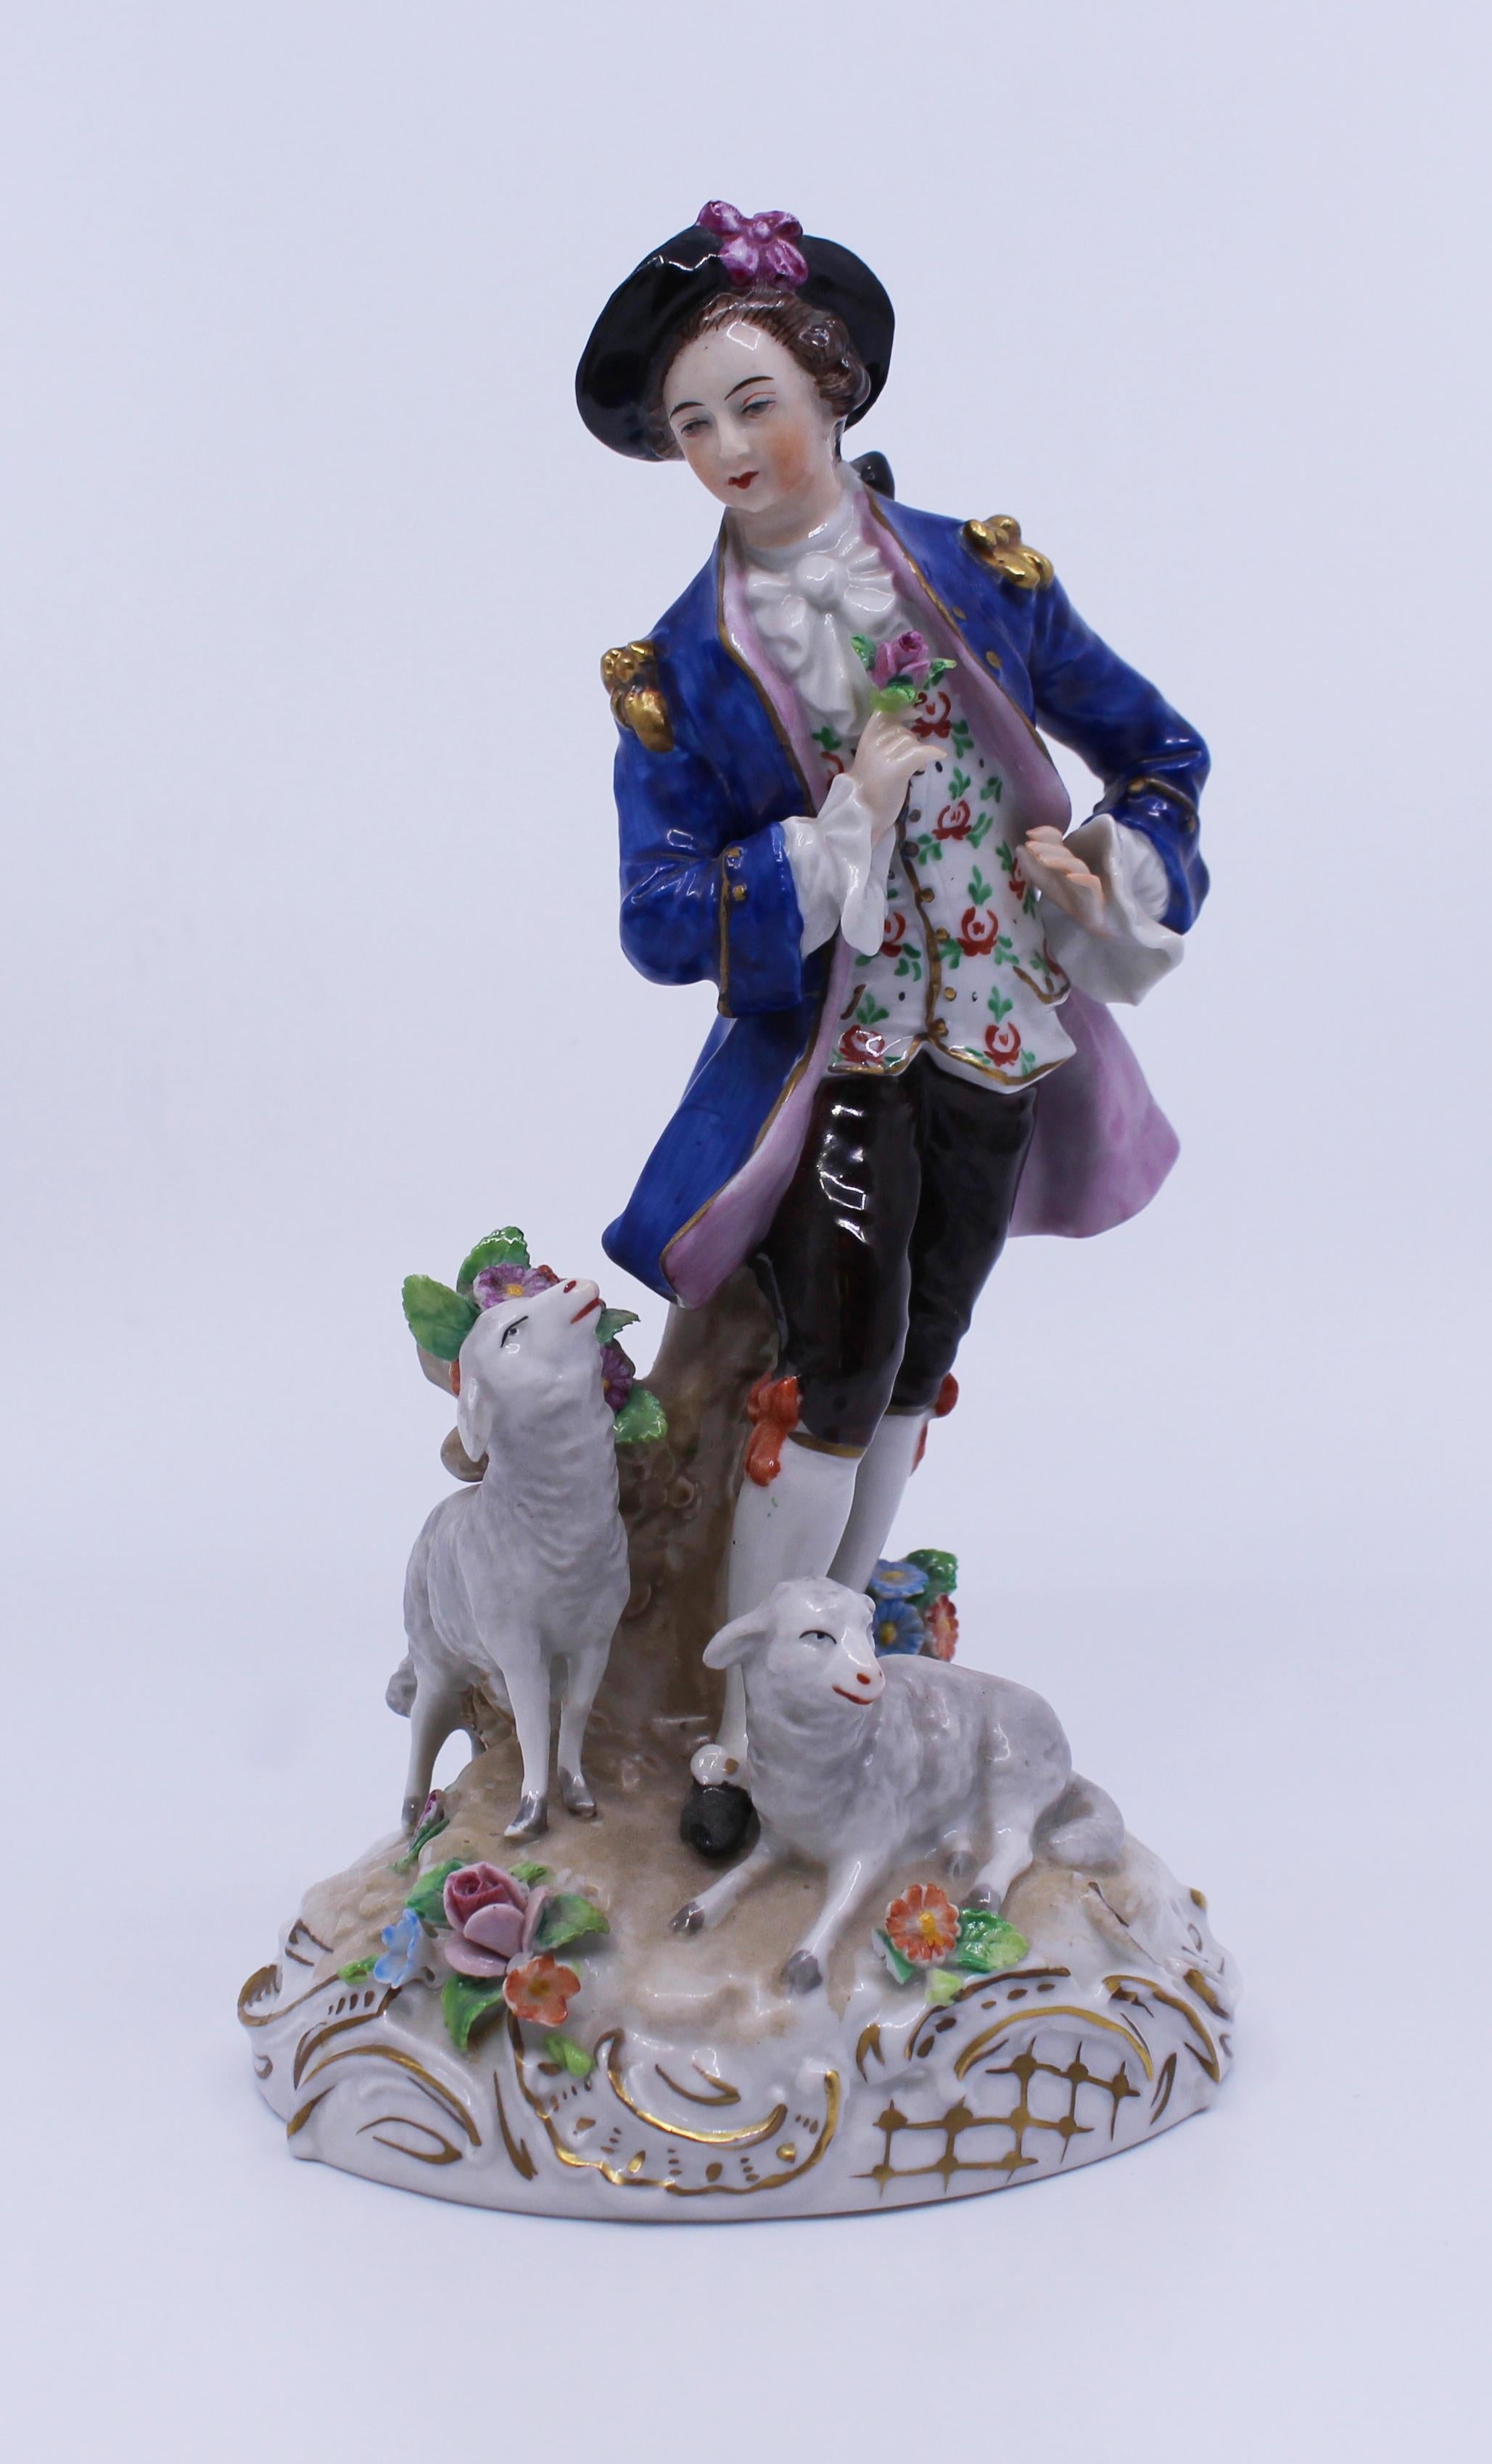 Sitzendorf Porcelain Nobleman with Lambs Figurine


Mid 20th c., c.1950

Manufactured by Sitzendorf, Germany

Width 10 cm / 3 3/4 in

Depth 8 cm / 3 in

Height 18 cm / 7 in

Good condition. Very small chip to flower as pictured
